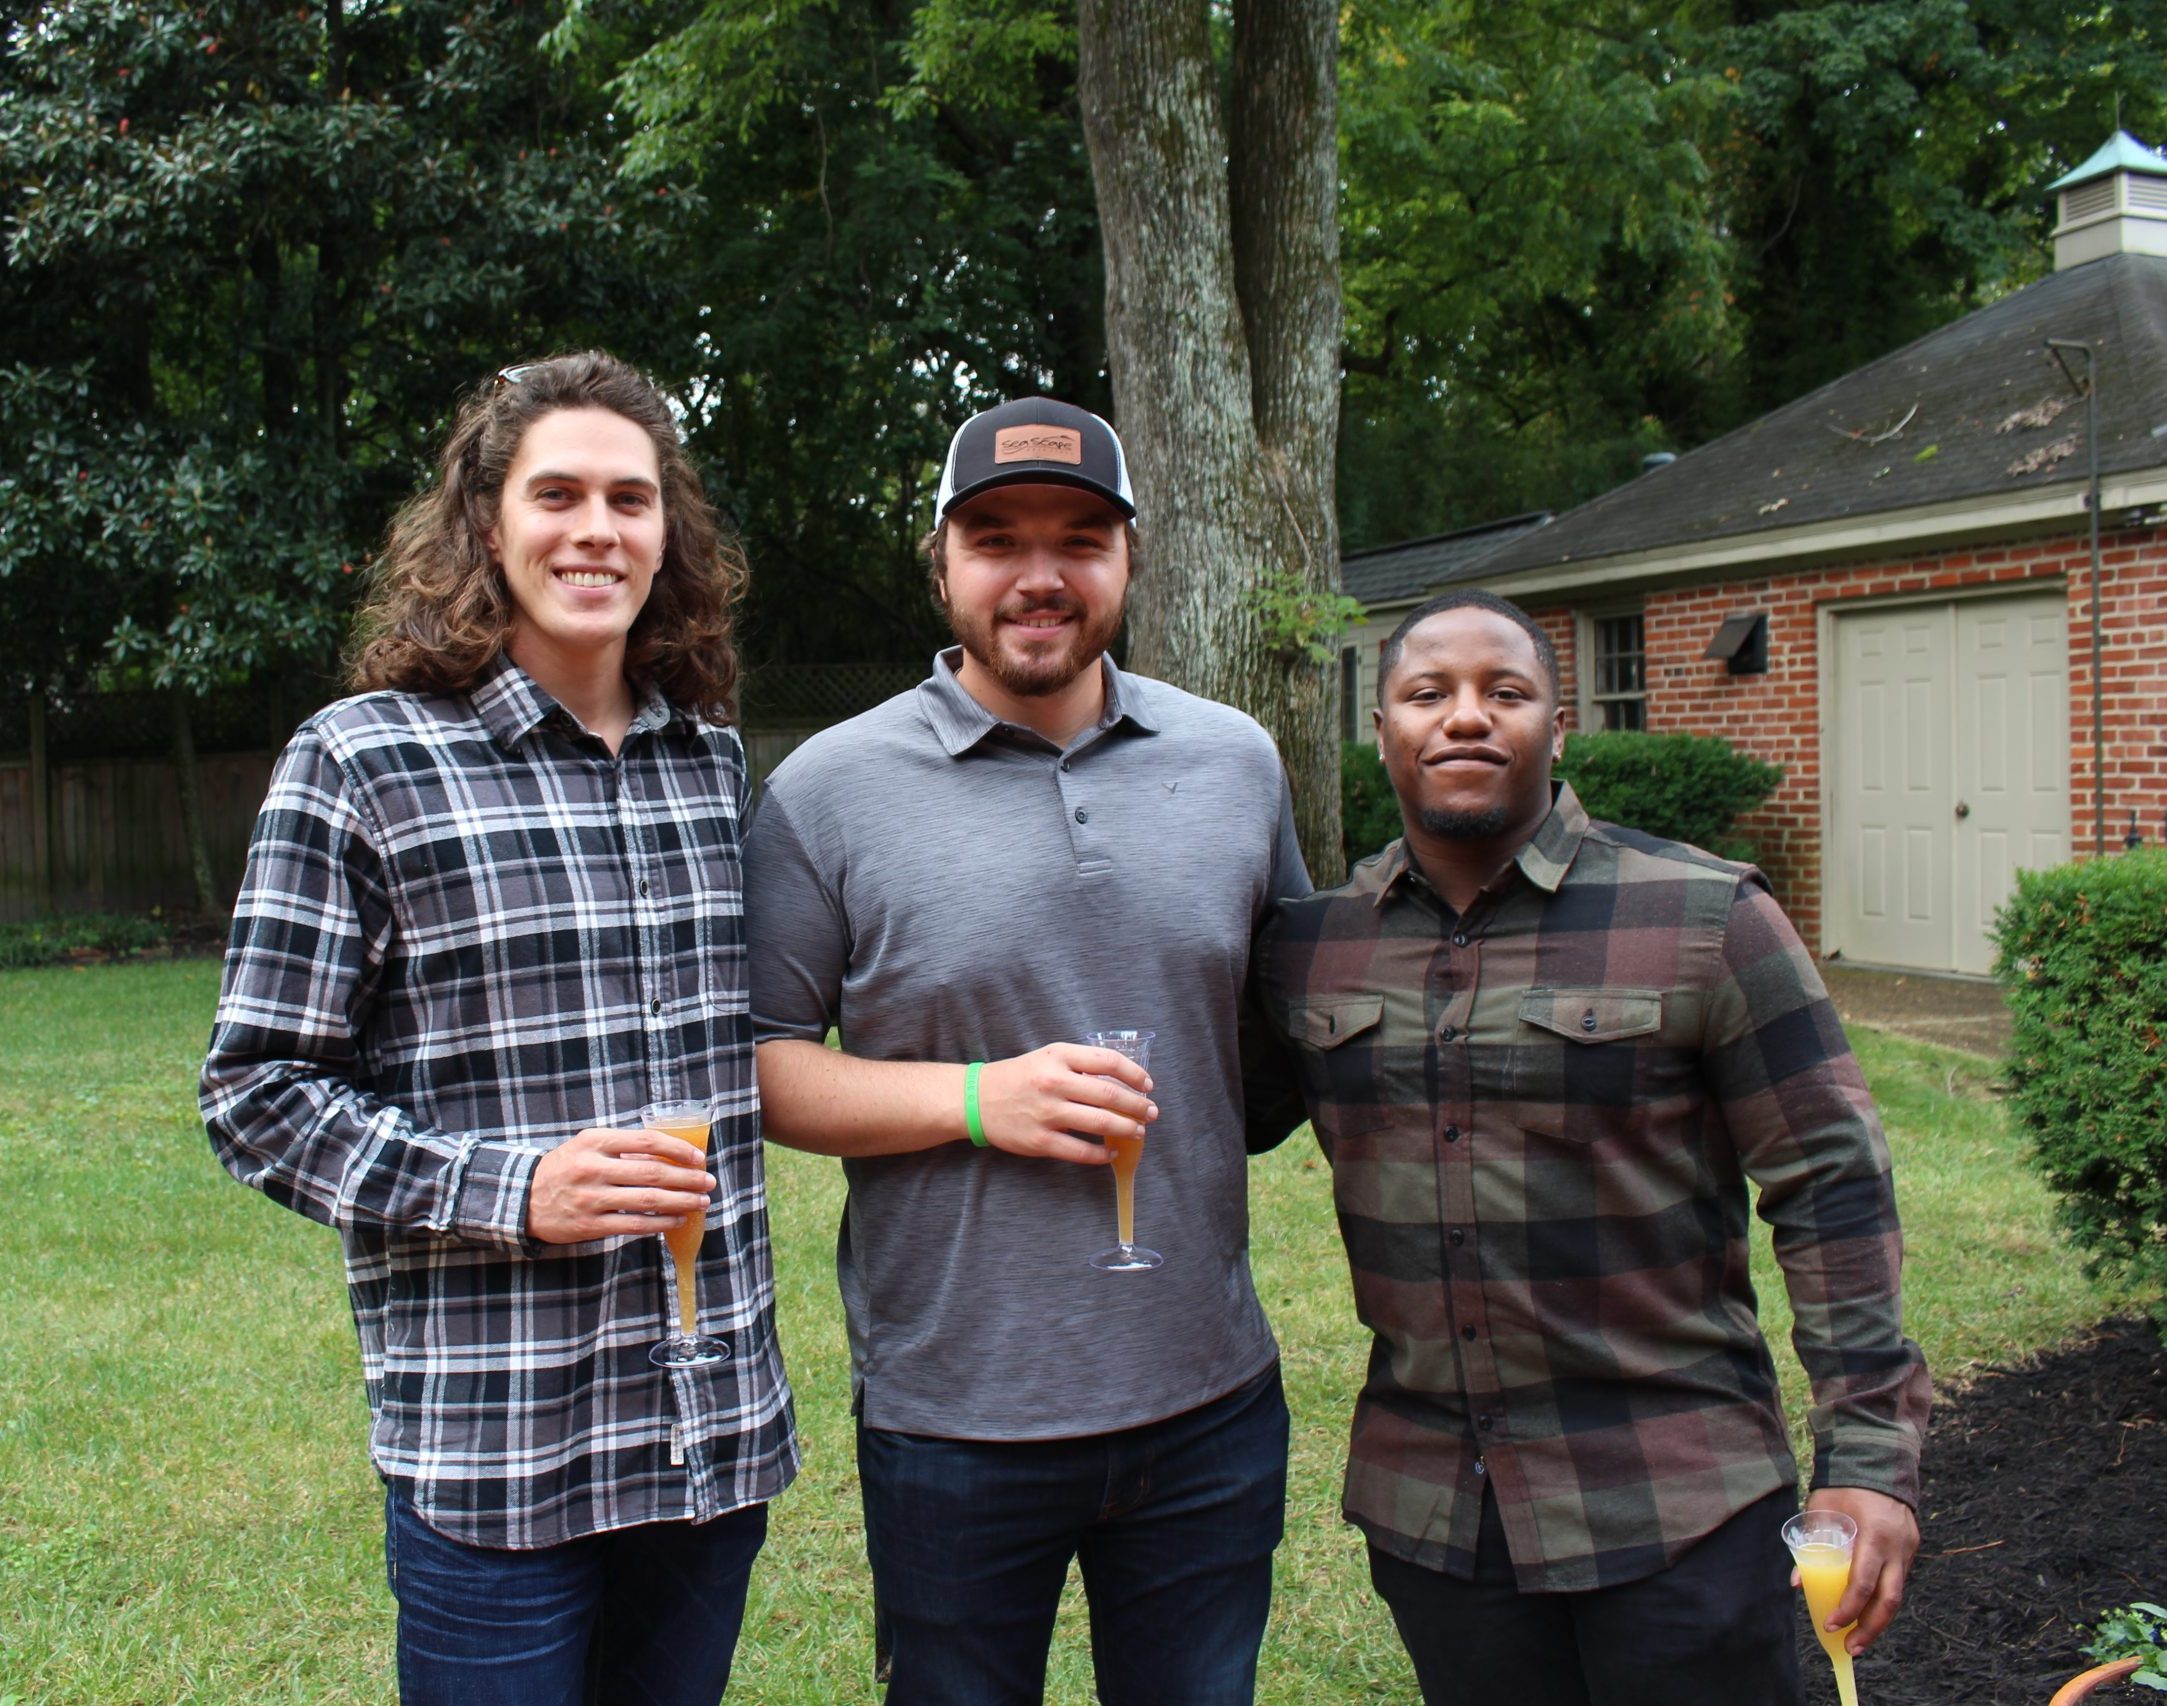 Three men posing for a picture during the event "Macon Mimosas"